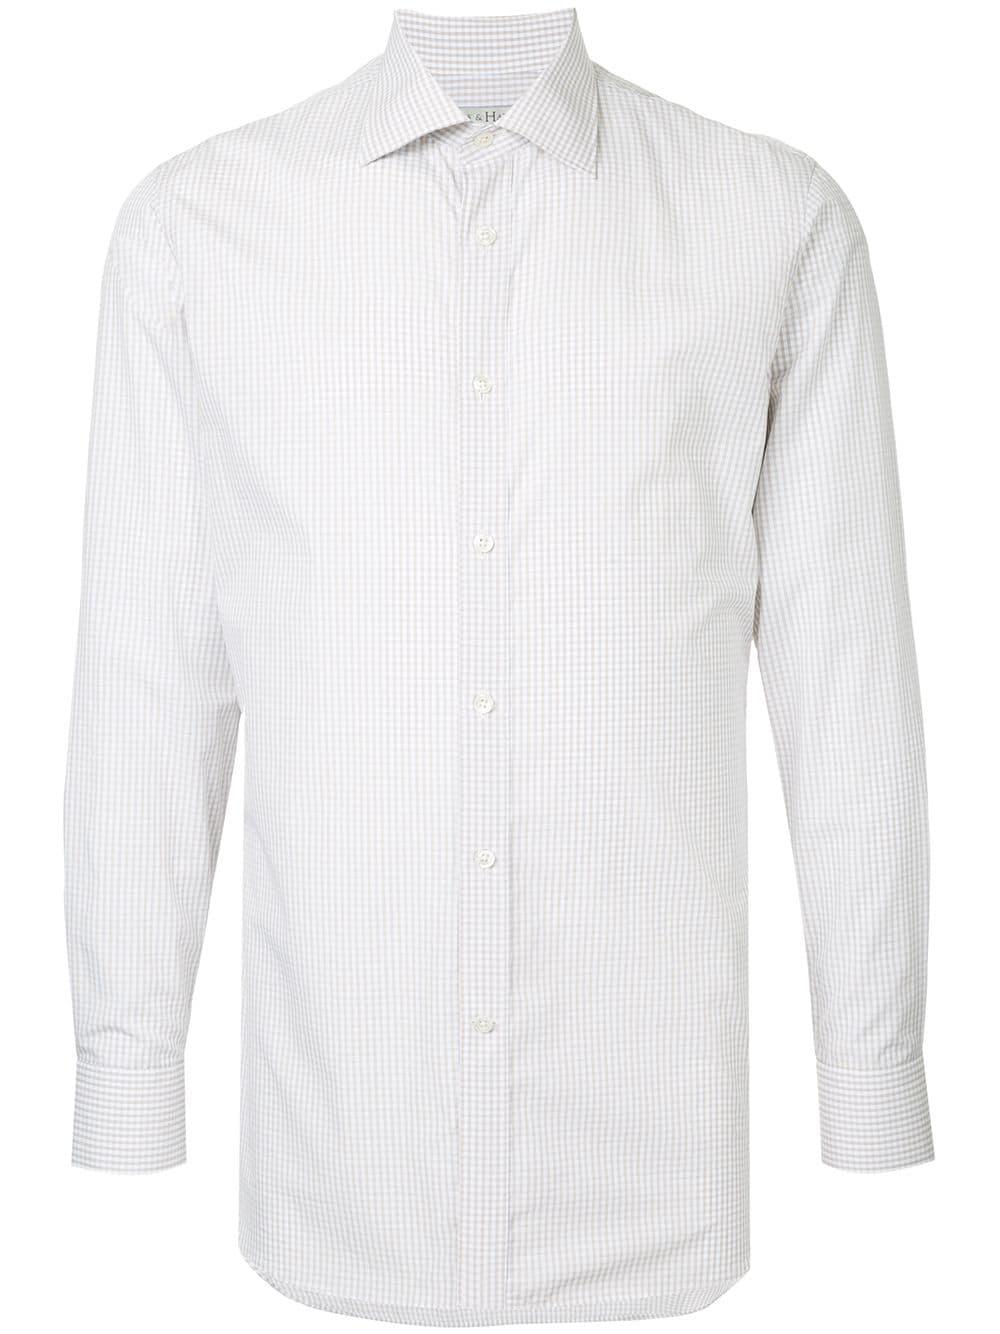 Gieves & Hawkes Cotton Check Fitted Shirt in White for Men - Lyst